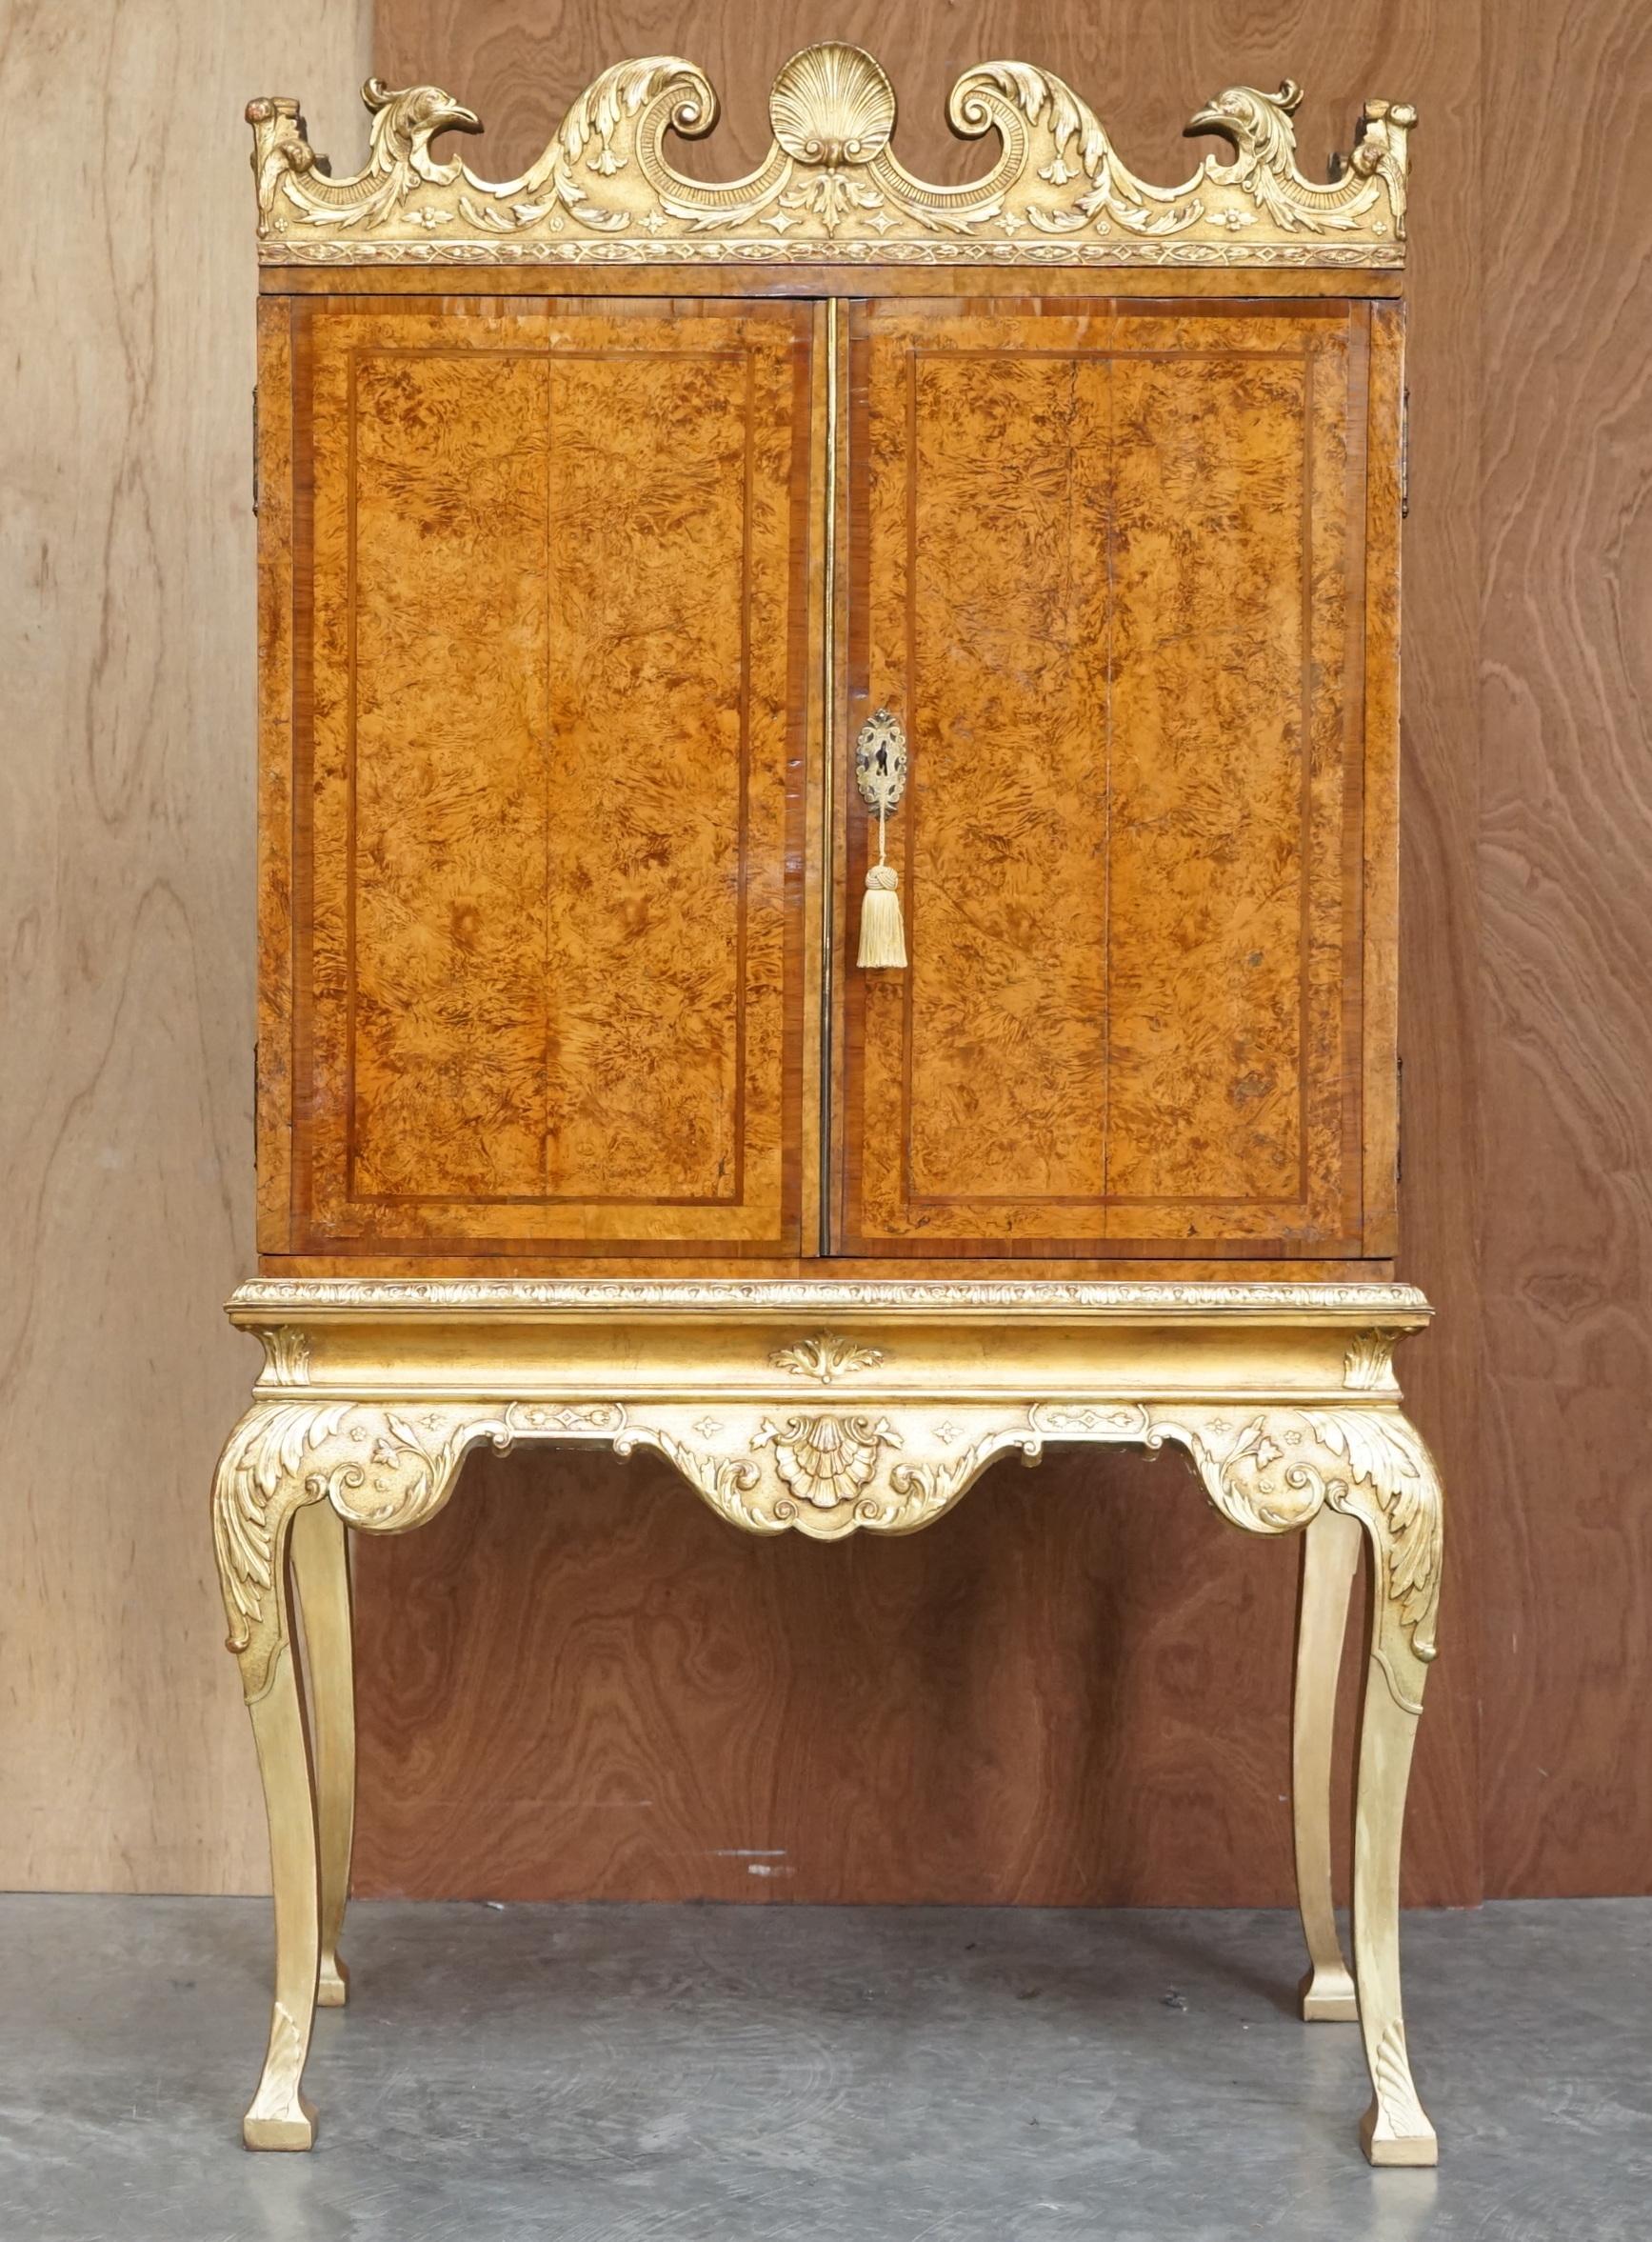 We are delighted to offer for sale this absolutely exquisite and important antique George II circa 1740 Mulberry wood drinks cabinets depicting eagles heads with original giltwood finish

What a piece! This is pure art furniture from every angle,